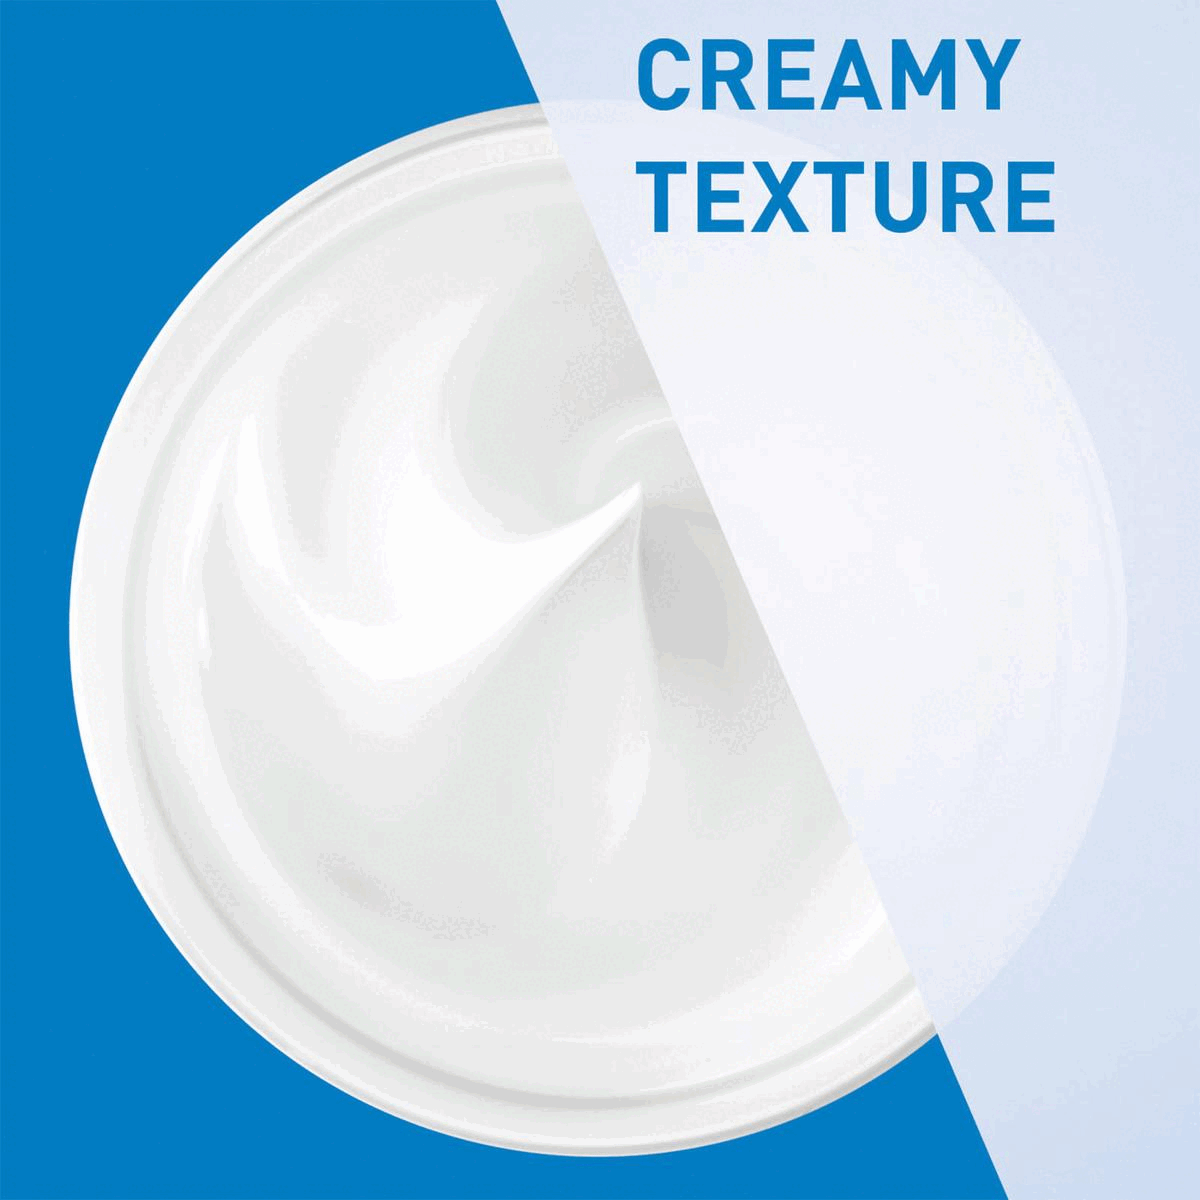 Image 1- creamy texture Image 2- 93% felt instant & long-lasting hydration- home tester club survey of 438 people Image 3- ceraVE developed with dermatologists 